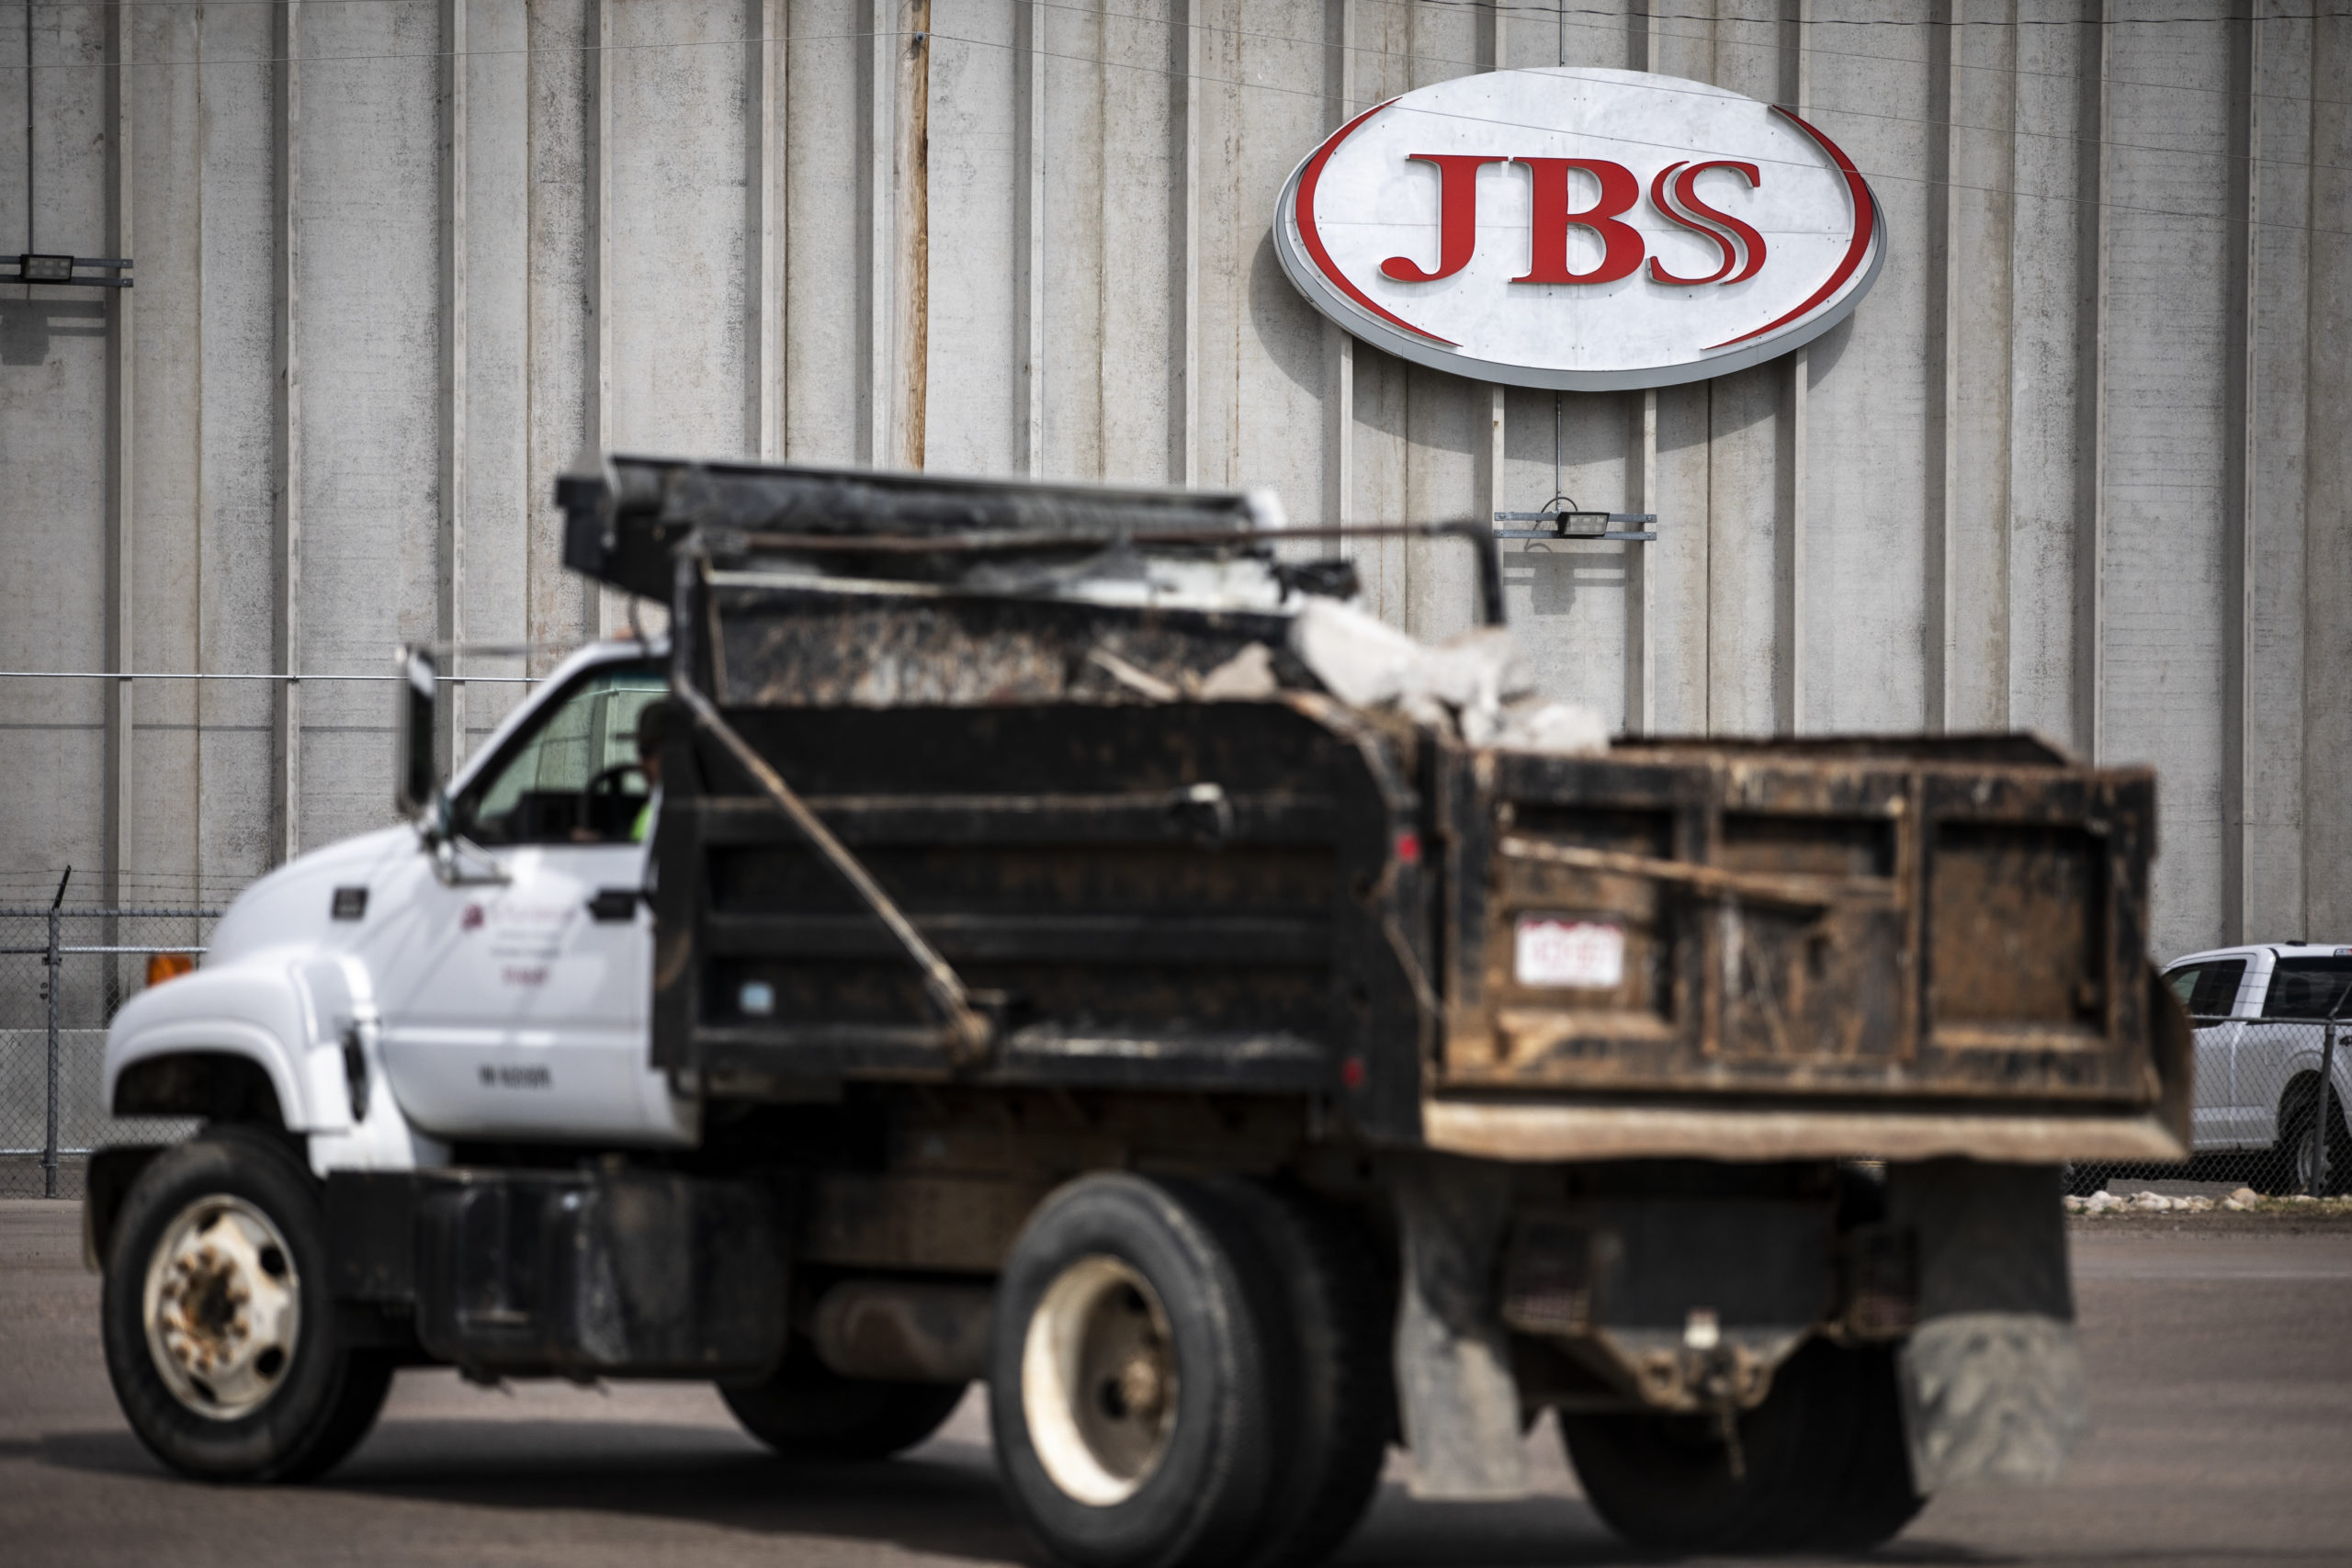 A JBS Processing Plant stands dormant after halting operations on June 1, 2021 in Greeley, Colorado. JBS facilities around the globe were impacted by a ransomware attack, forcing many of their facilities to shut down. (Chet Strange/Getty Images)